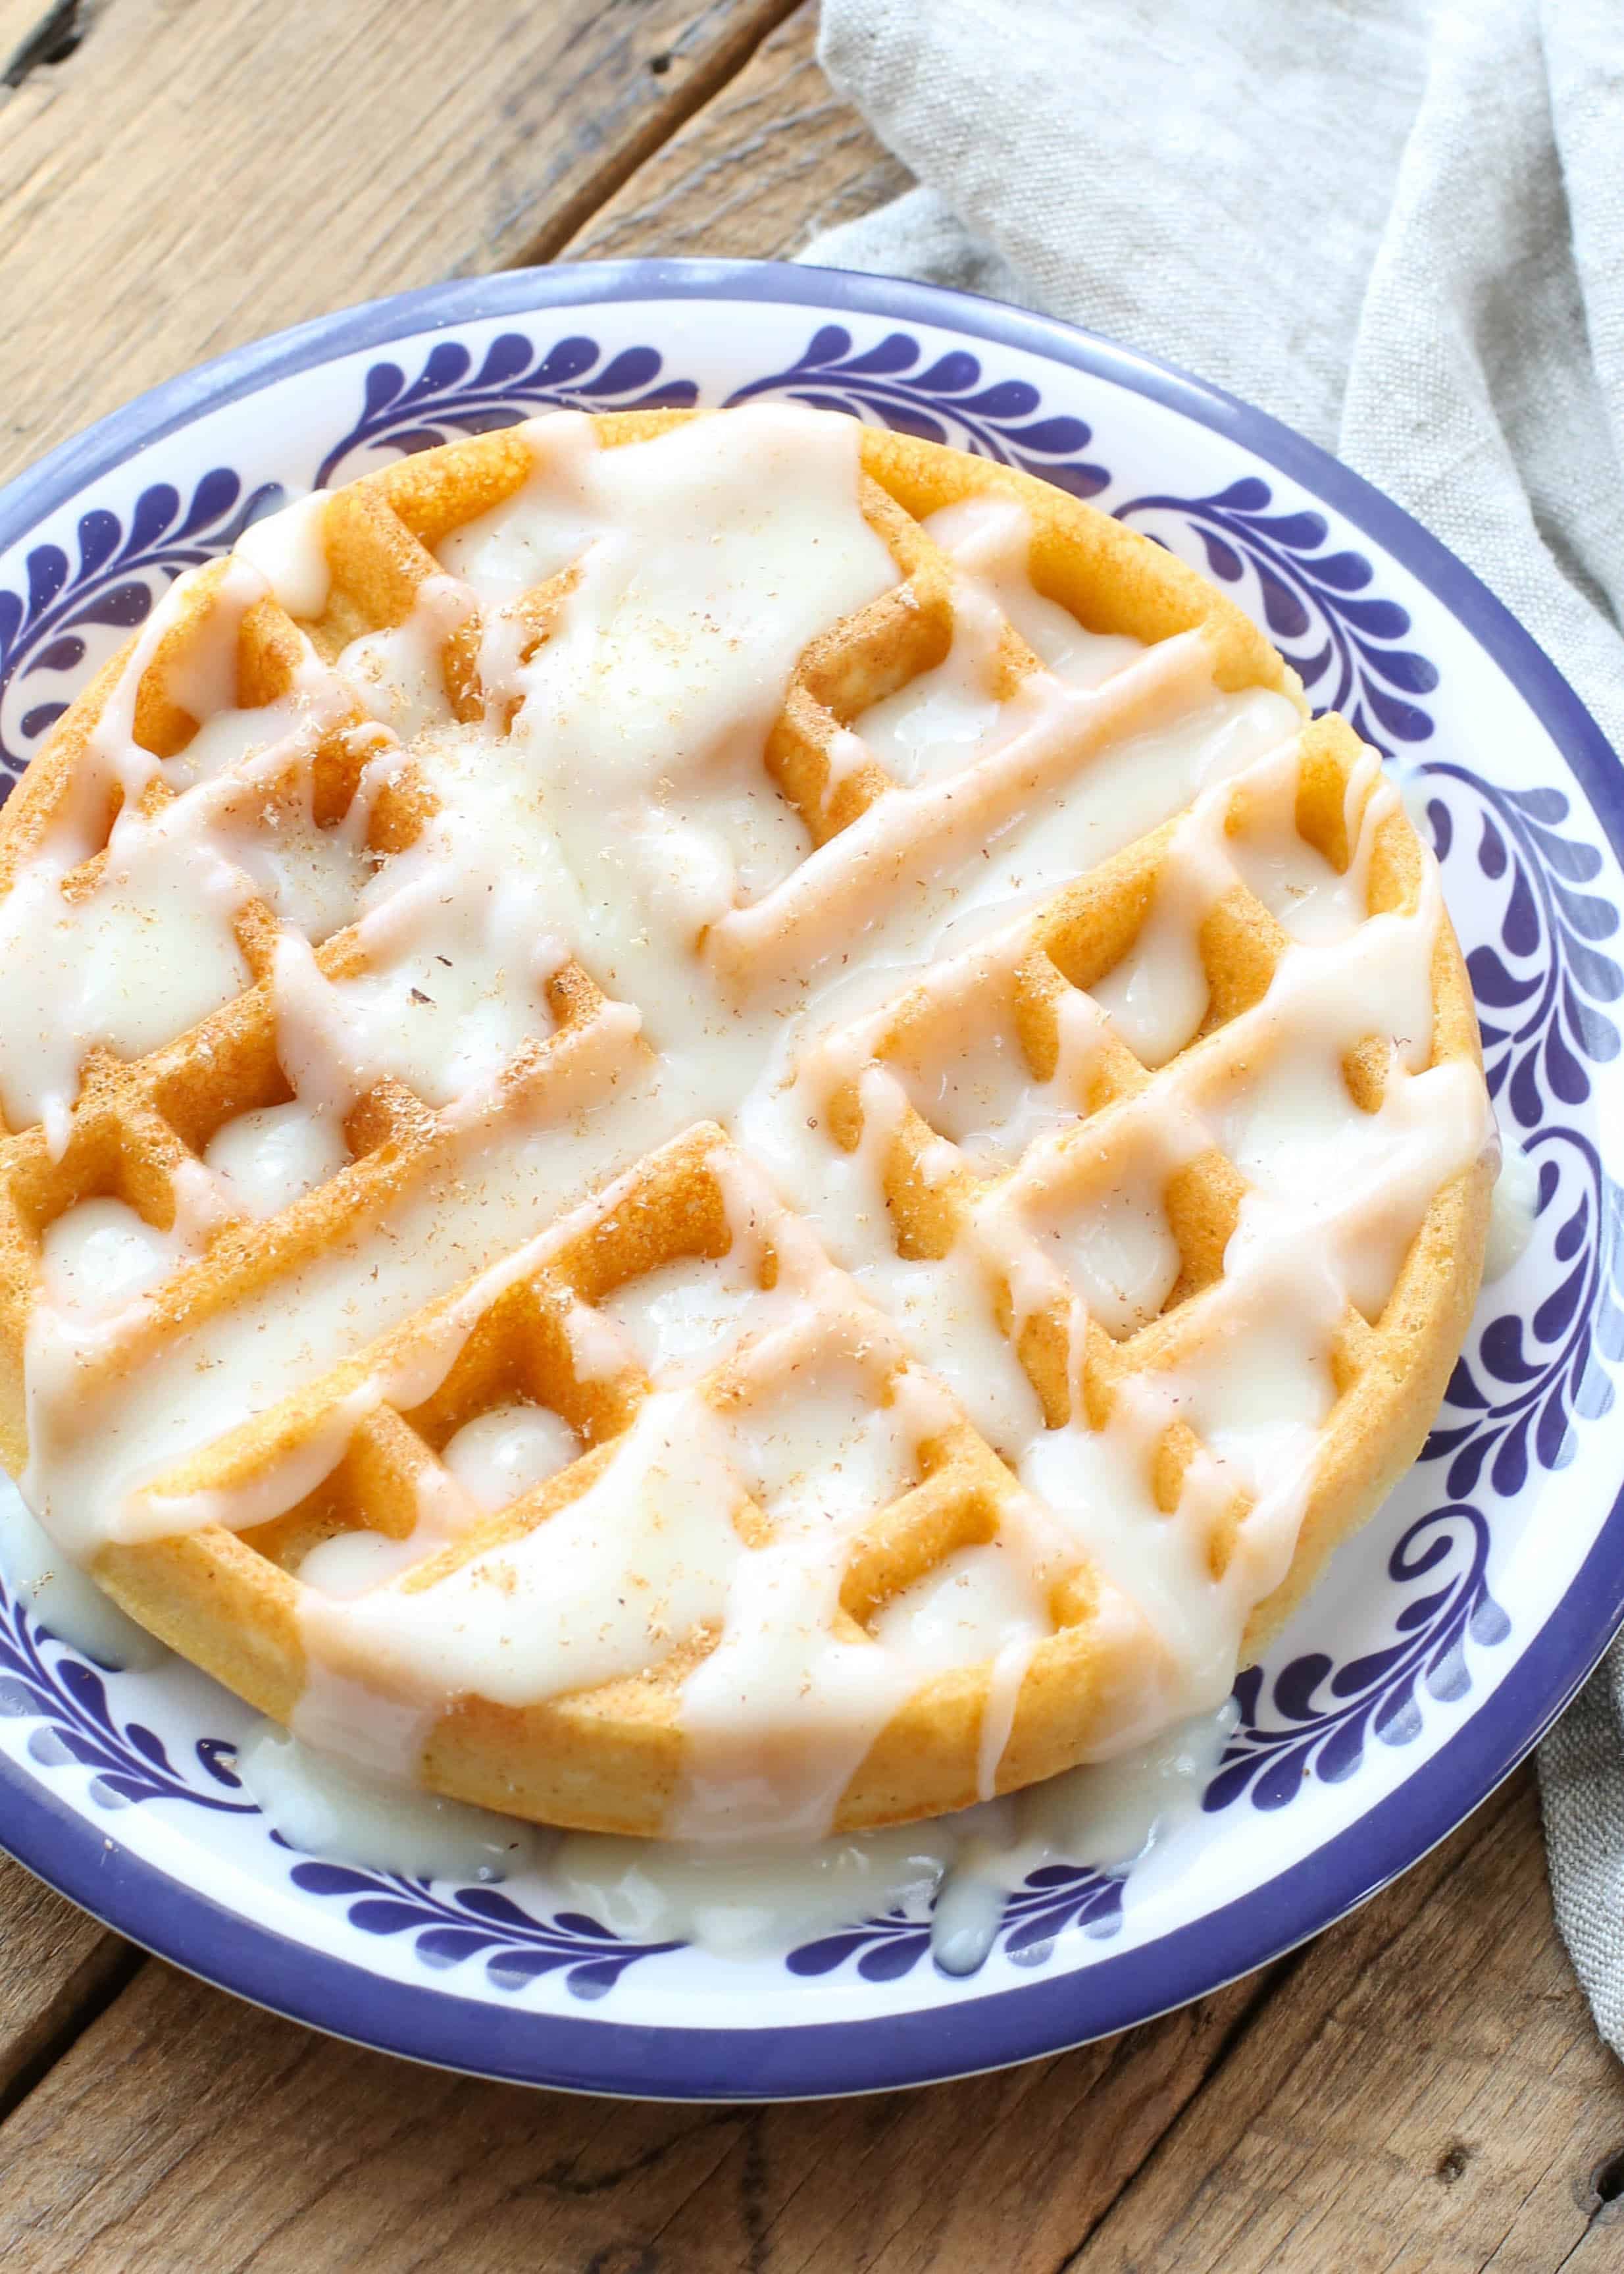 The Best & Easiest Waffles Ever - Echoes of Laughter